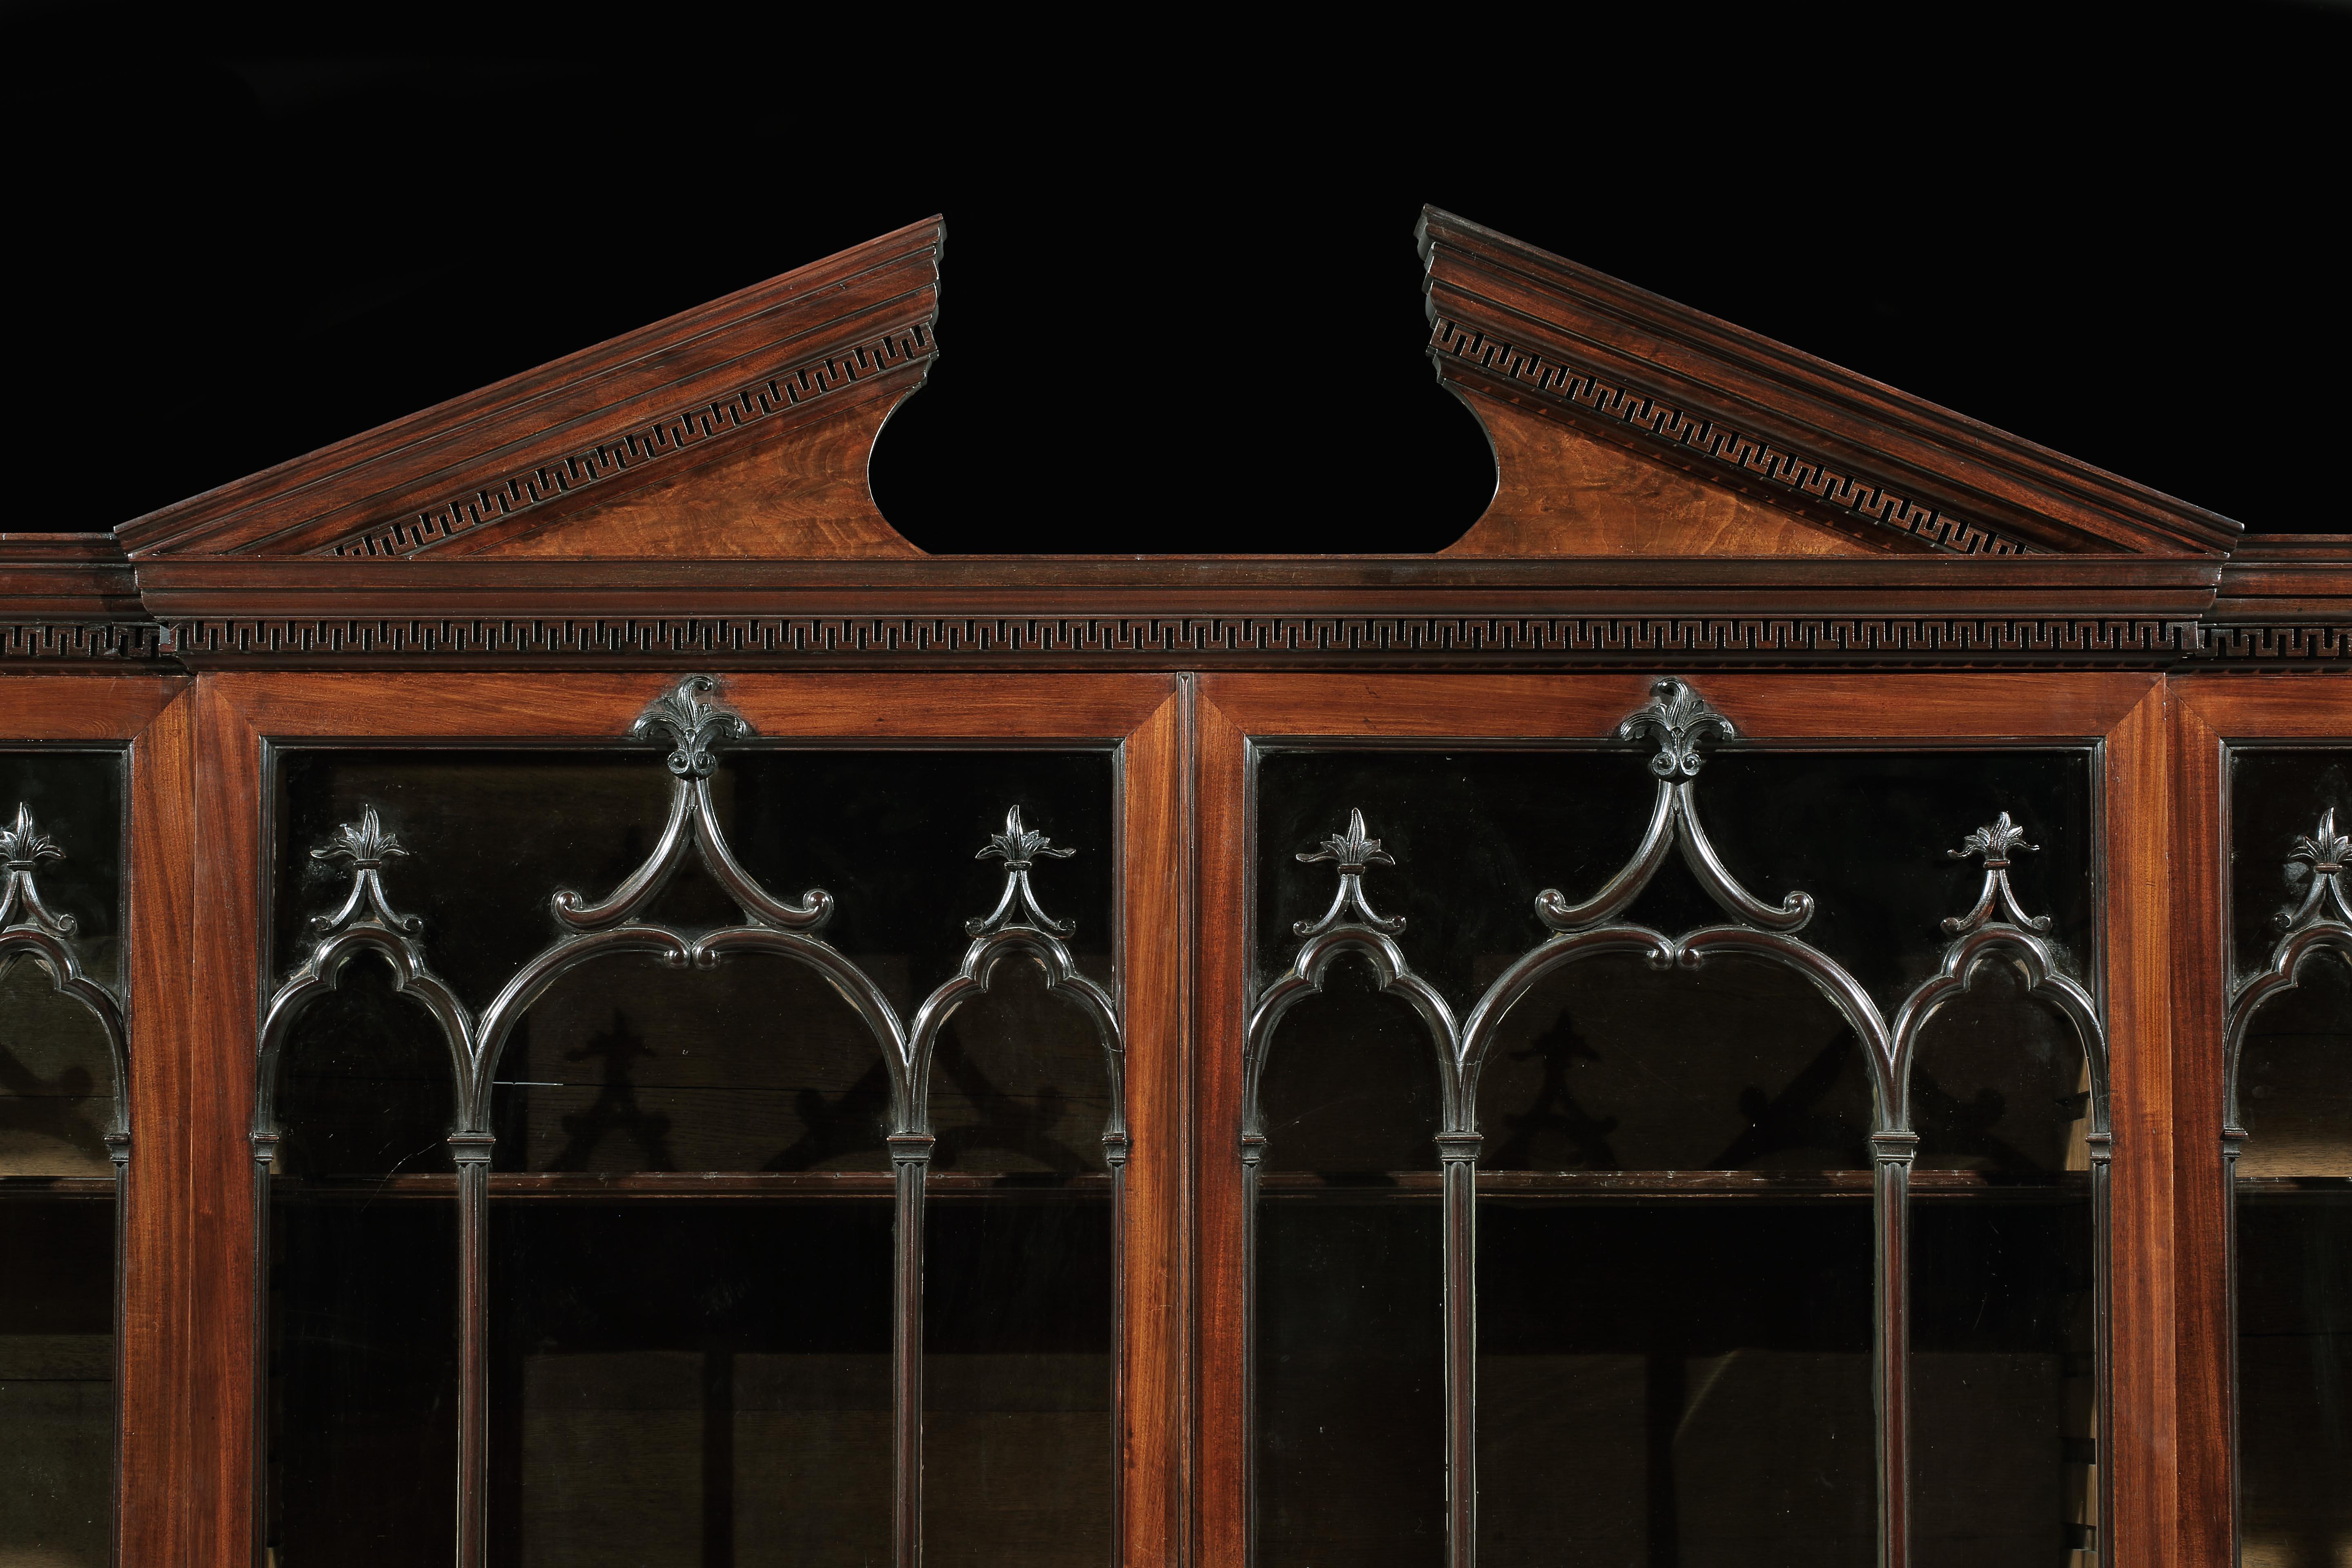 A superb George III Chippendale period mahogany breakfront library bookcase, the raised architectural pediment, with a detailed moulded edge, above arched Gothic glazed doors carved with acanthus, resting on a raised paneled door base with a deep